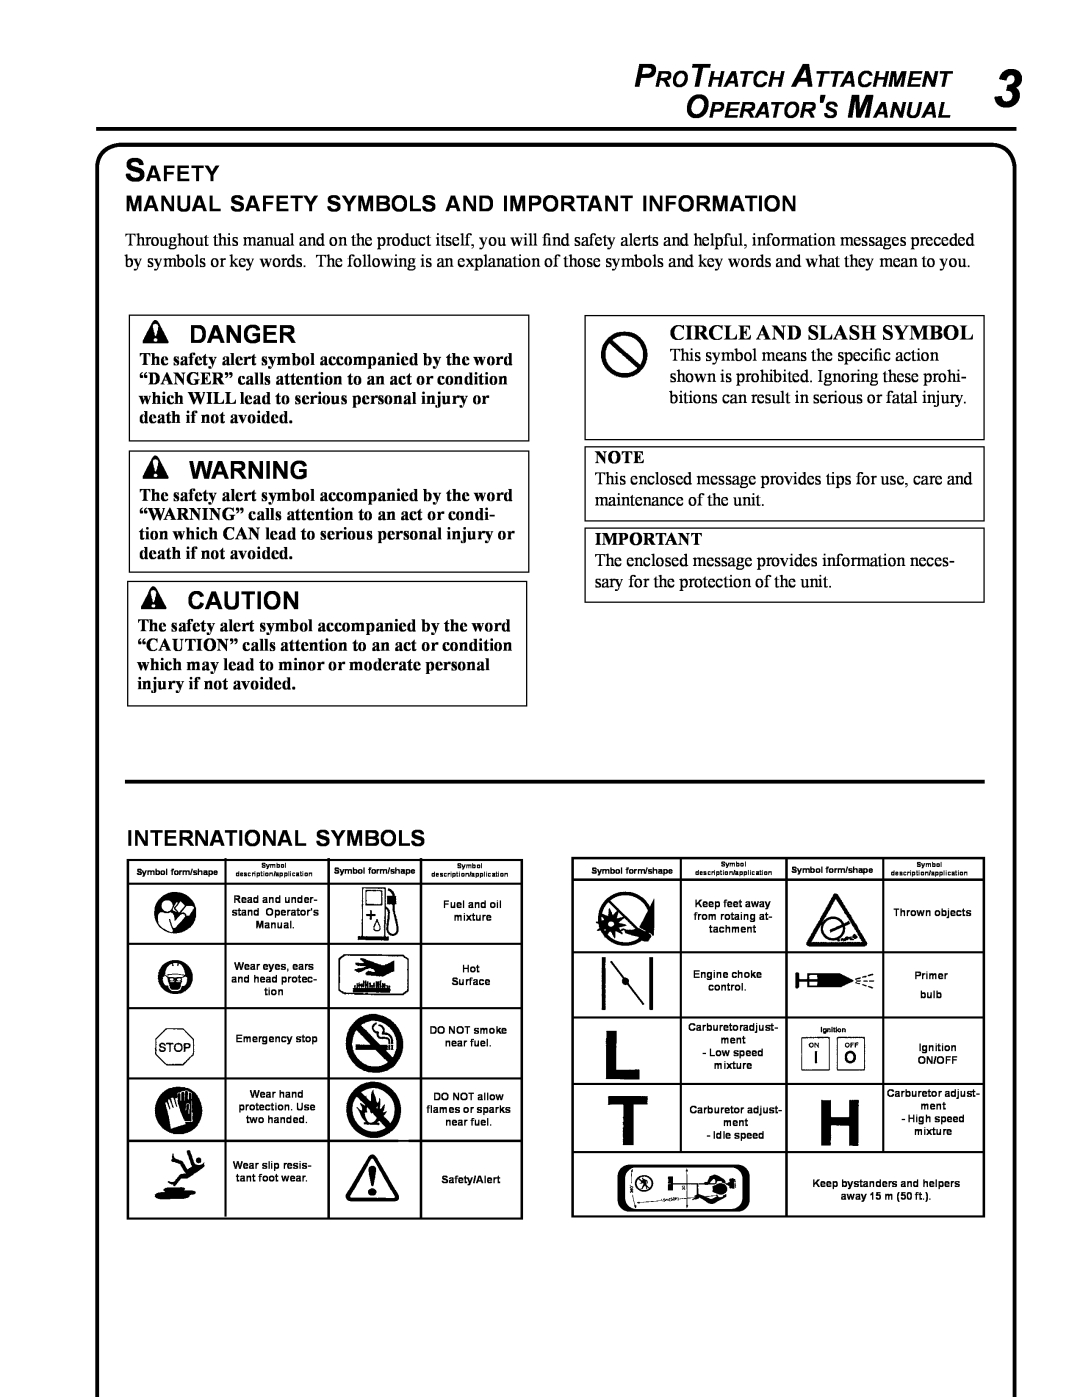 Echo 99944200563 Danger, ProThatch Attachment, Operators Manual, Safety, manual safety symbols and important information 